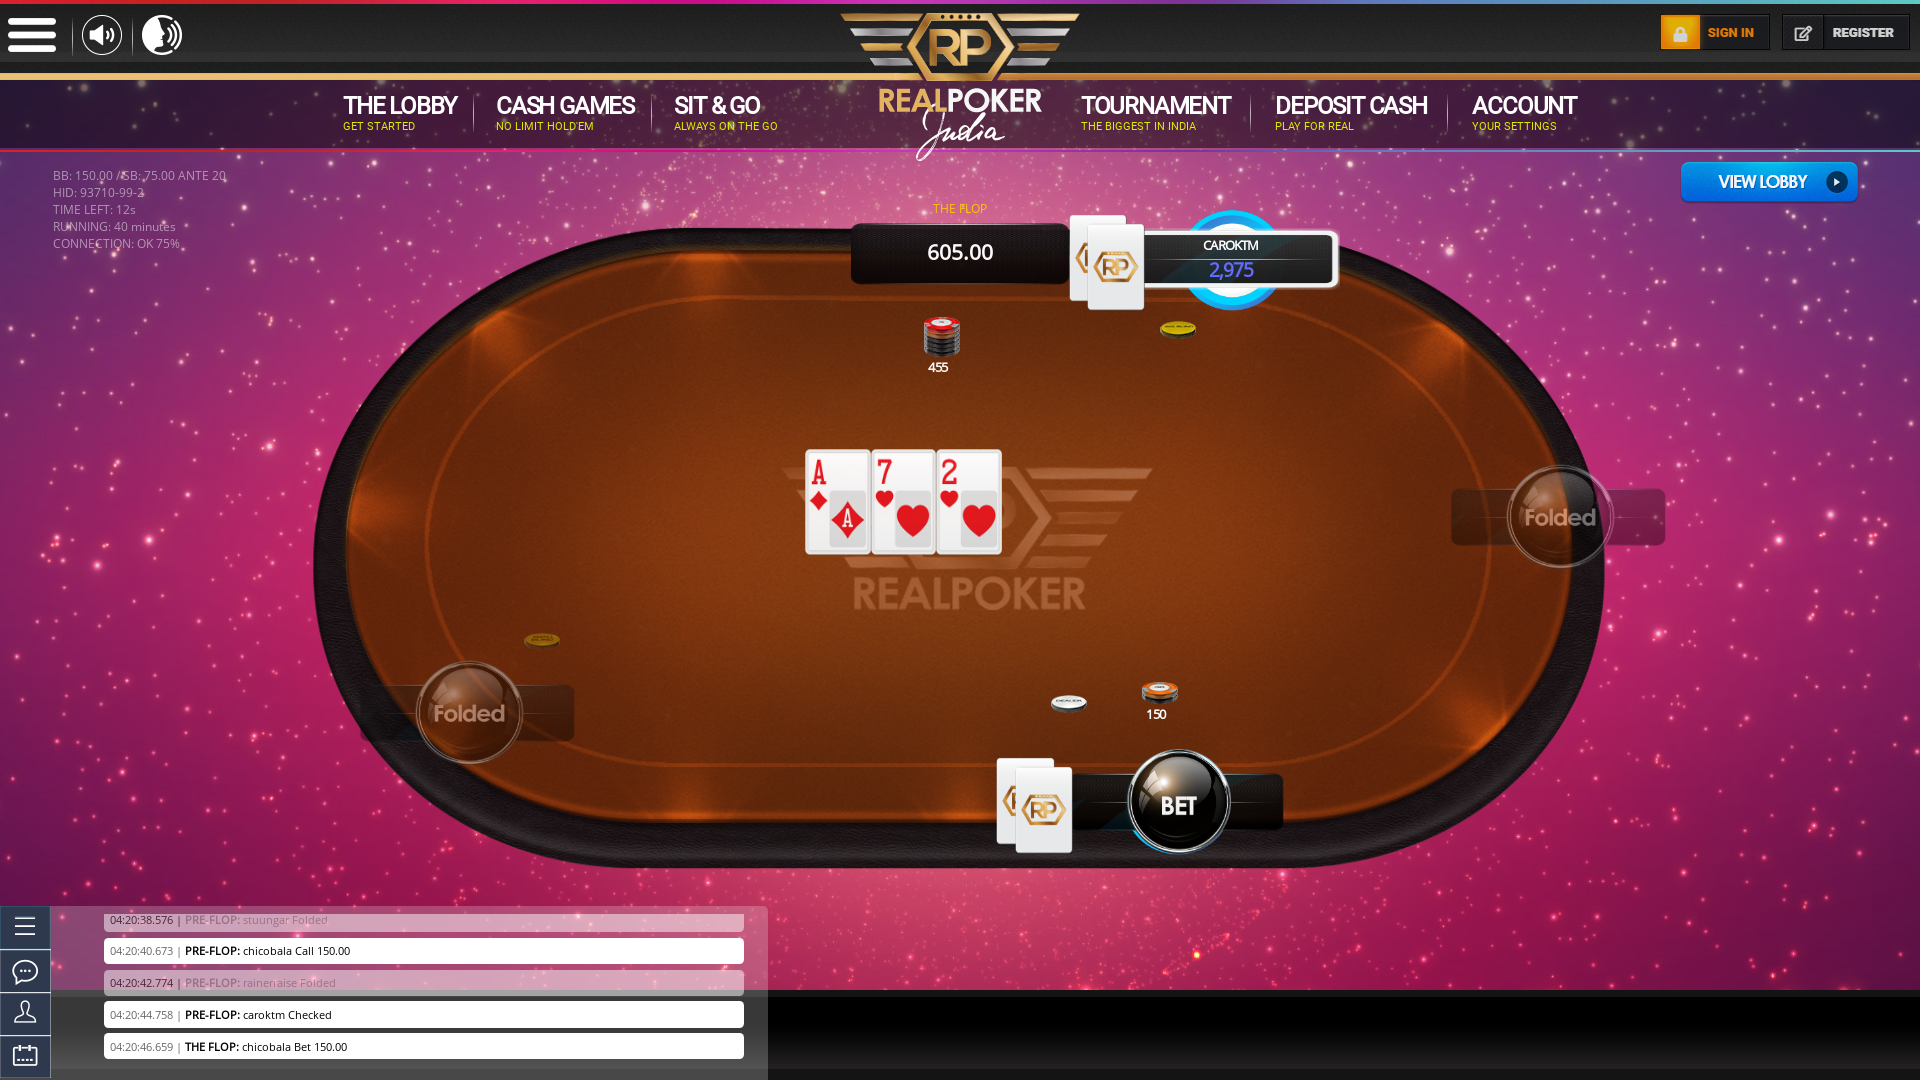 Indian poker on a 10 player table in the 40th minute